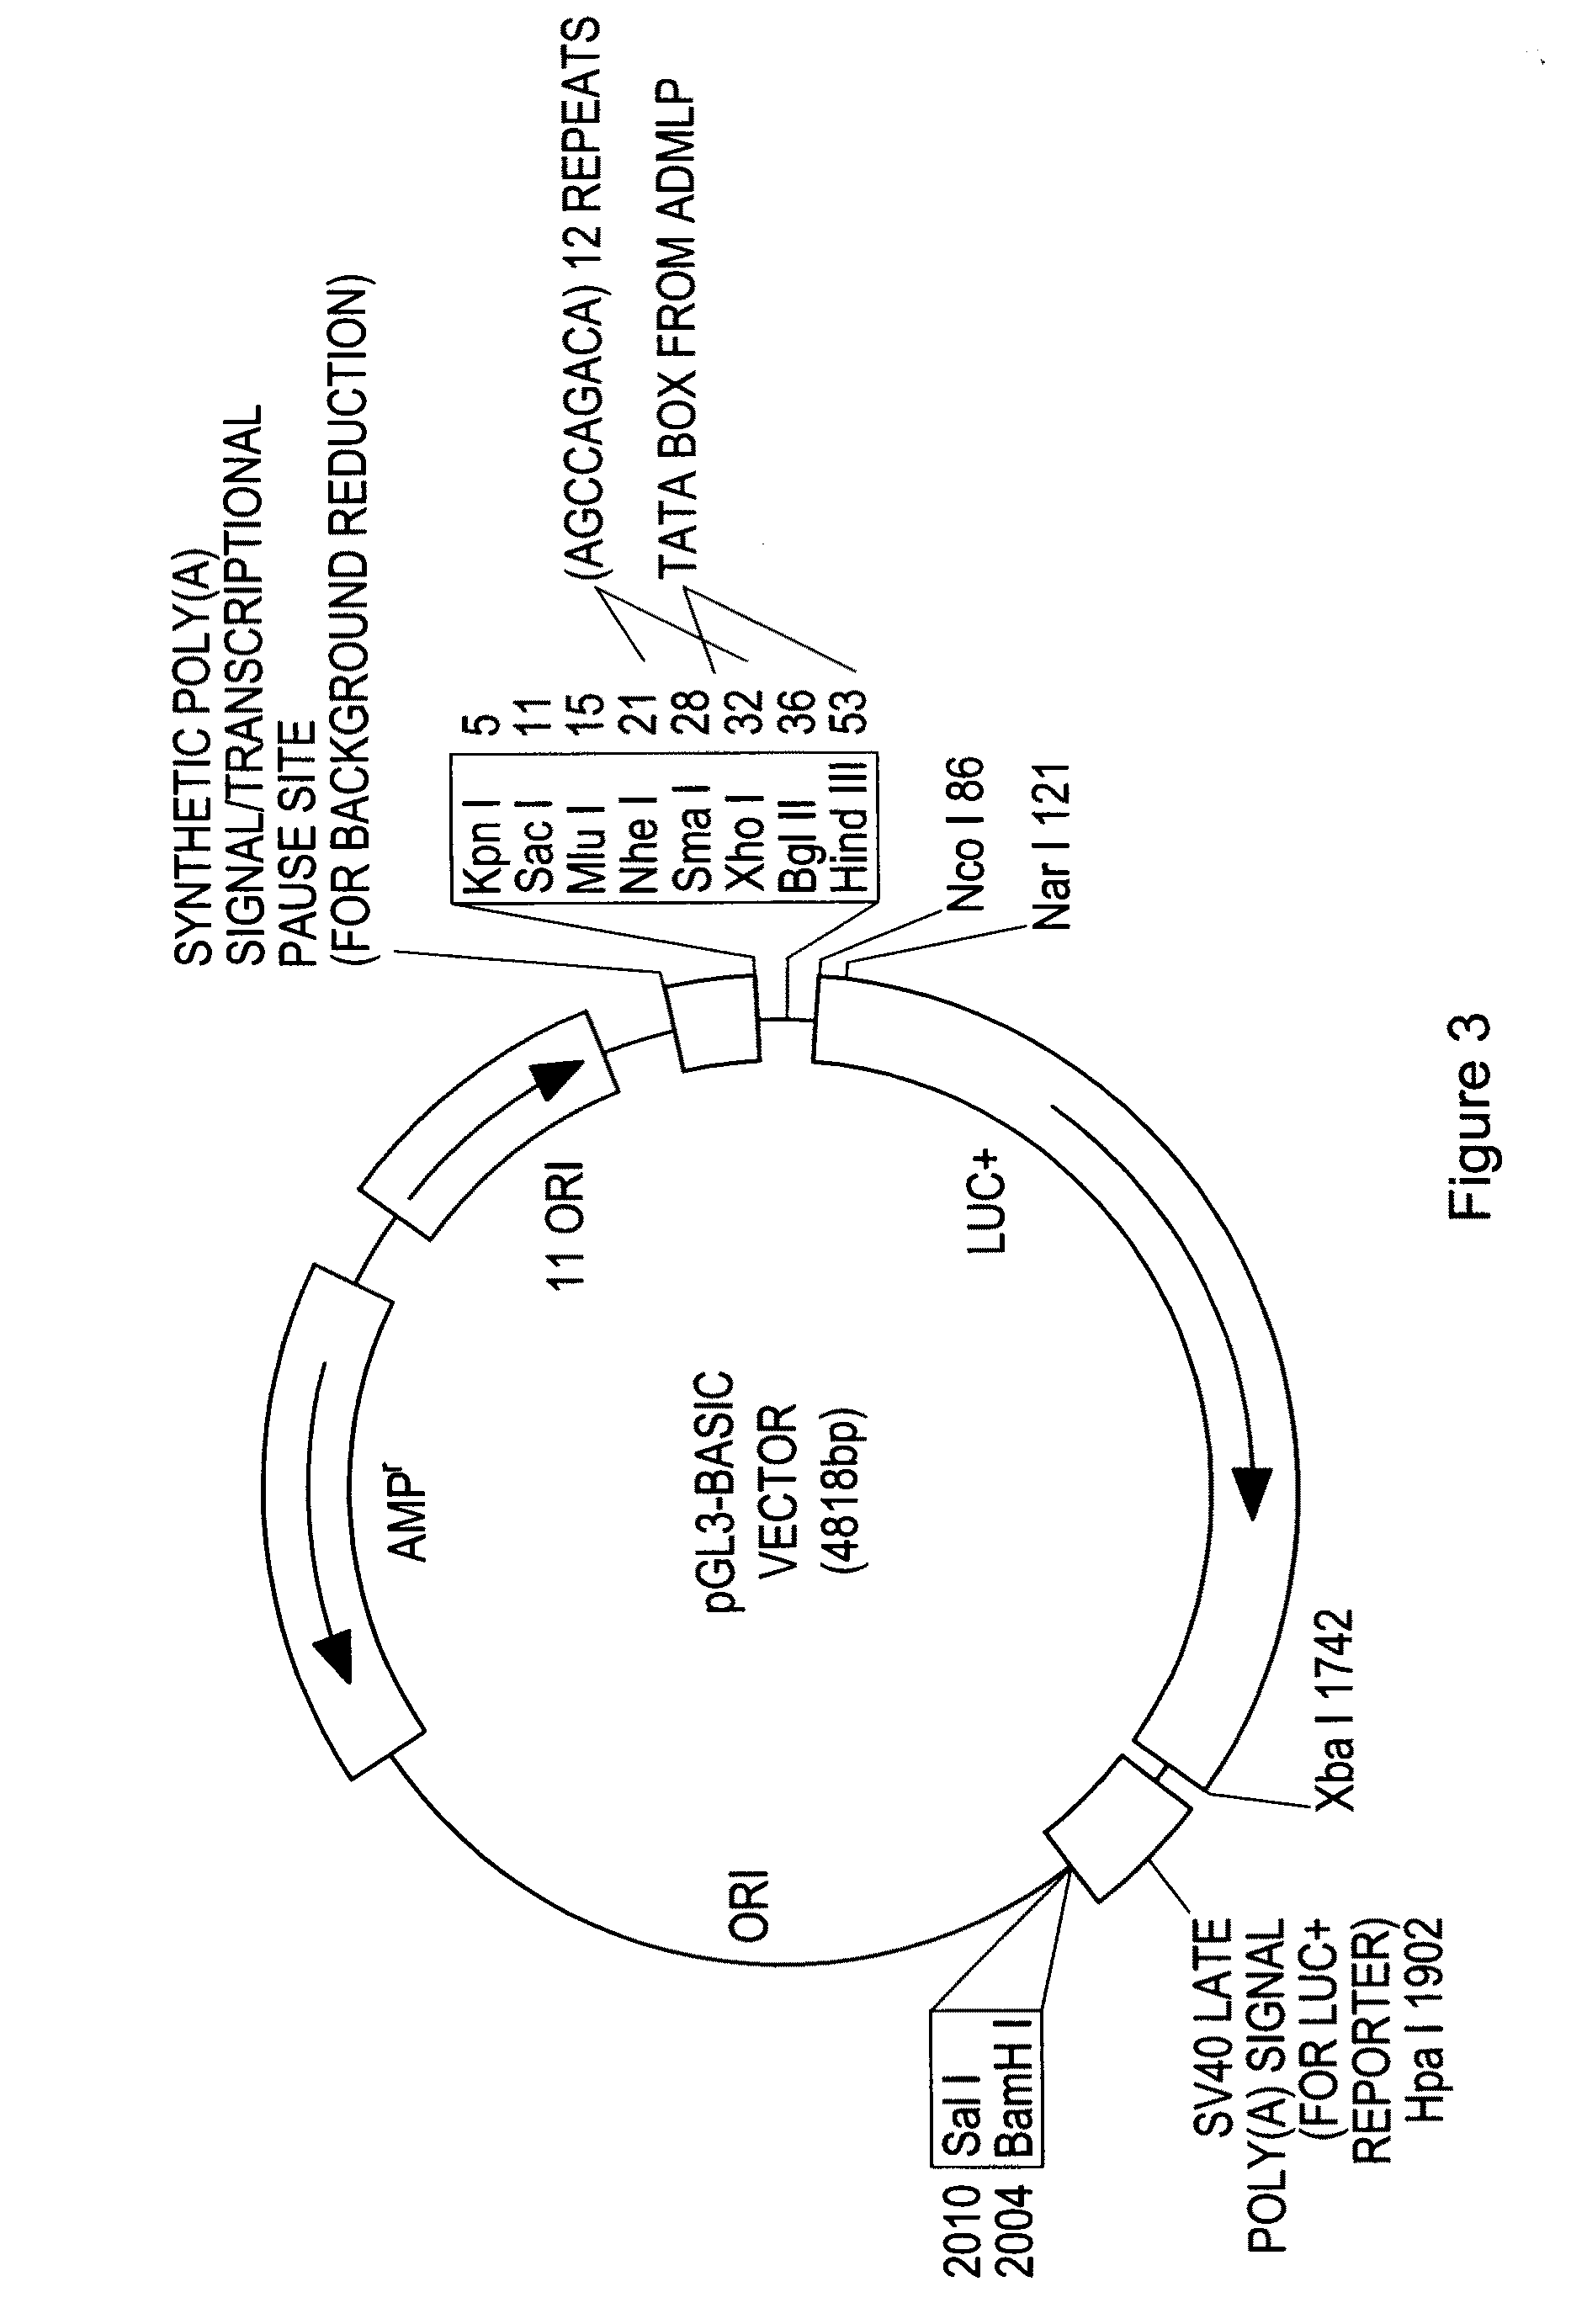 Activin-ActRIIa antagonists and uses for decreasing or inhibiting FSH secretion